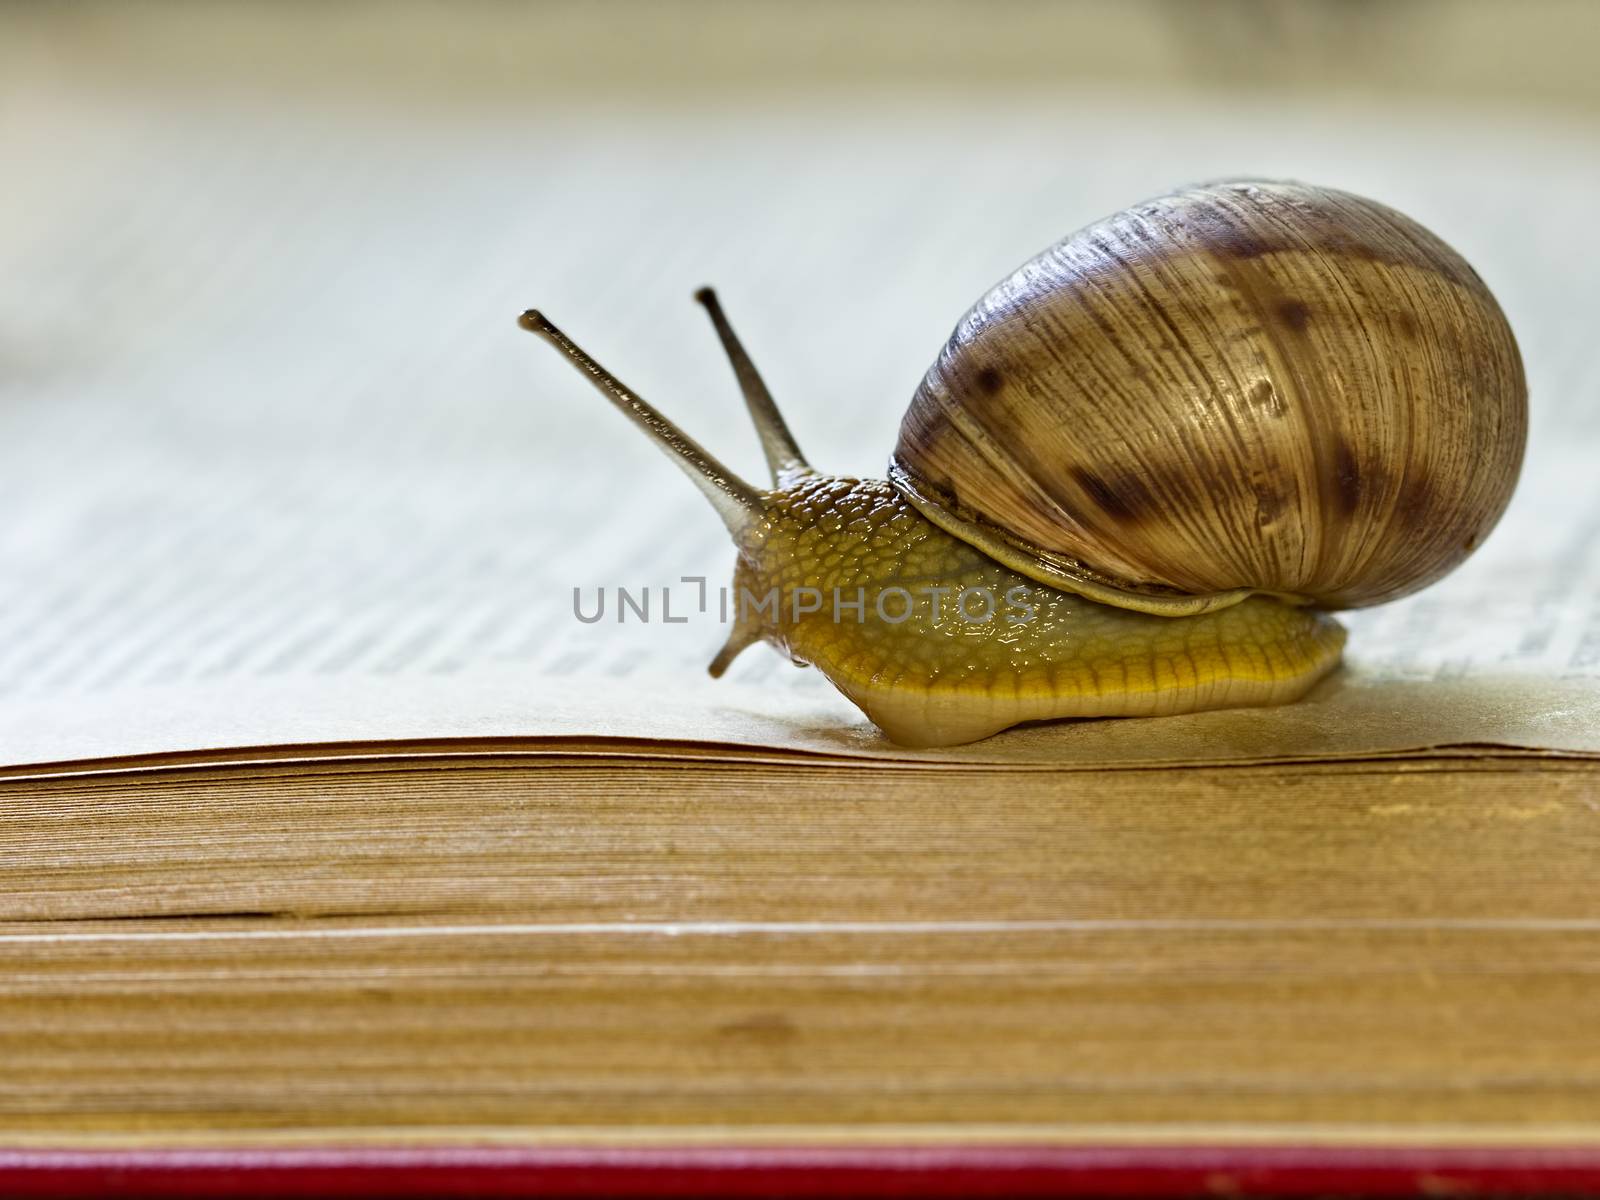 Big snail - Helix pomatia - slowly crawling on the open page of a book as if reading it. Close-up selective focus image